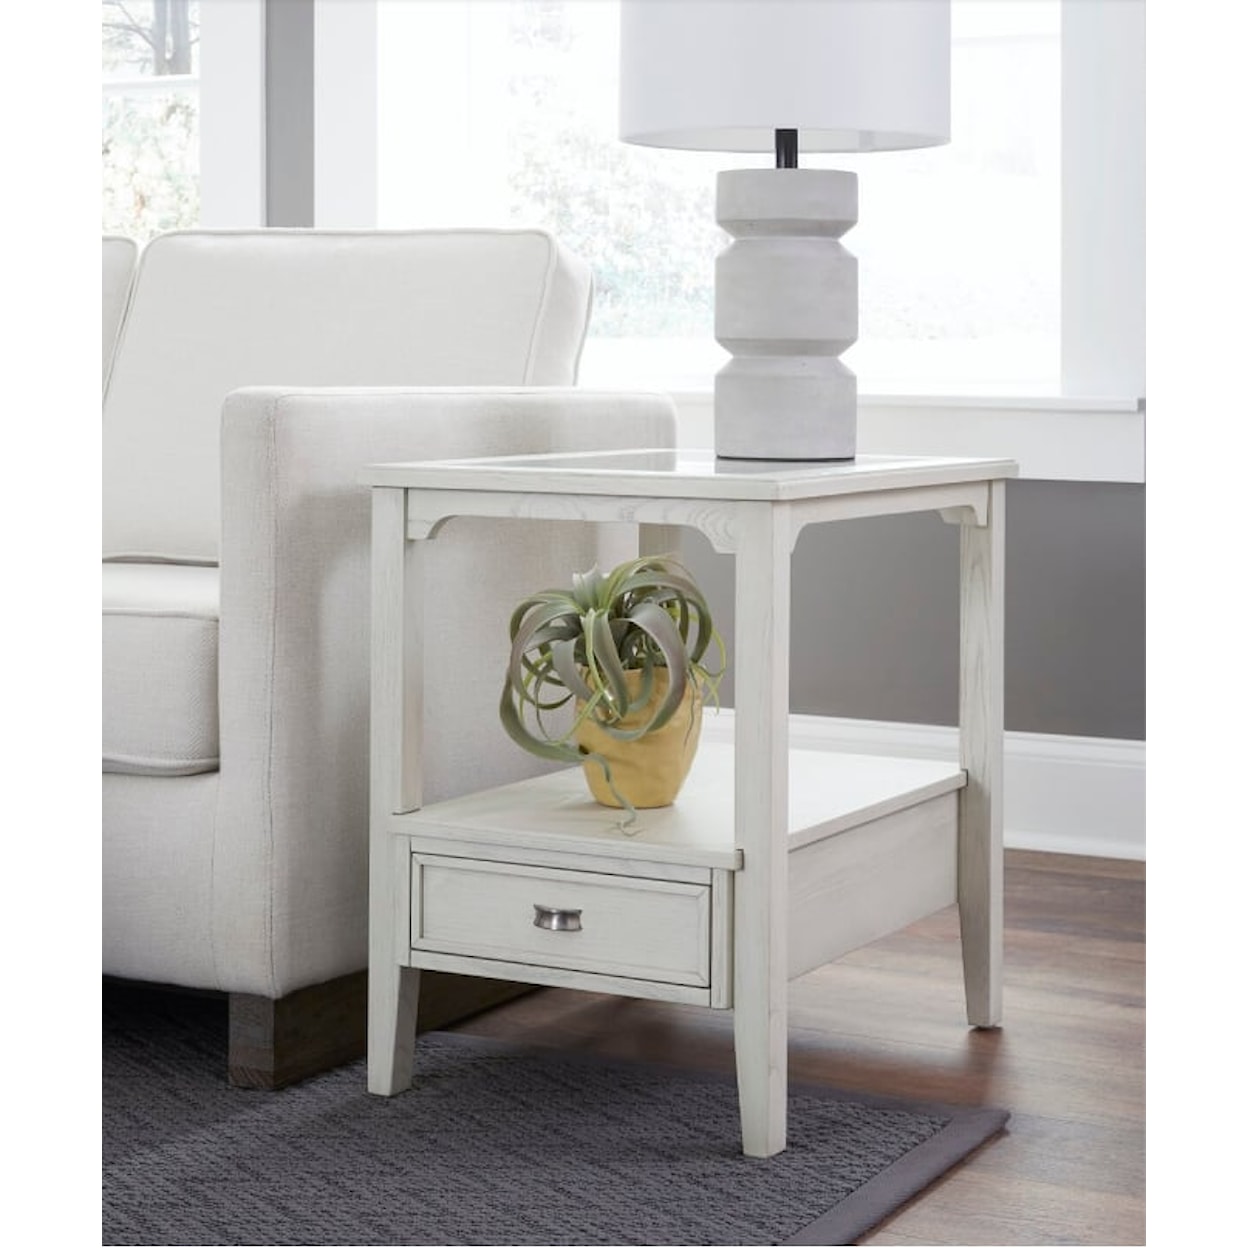 Null Furniture Outer Banks Rectangular End Table